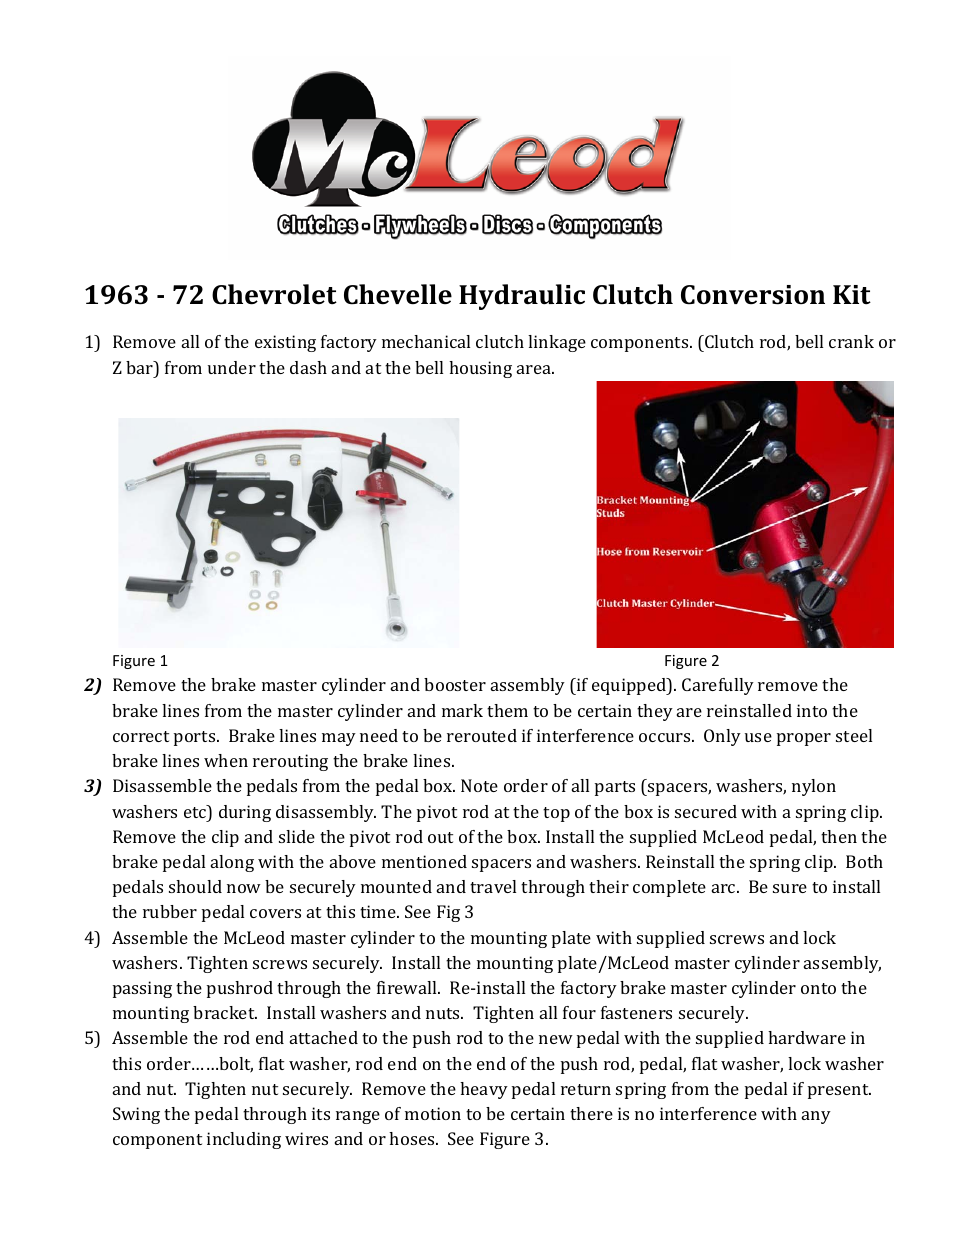 1963-1972 Chevelle Hydraulic Conversion Instructions